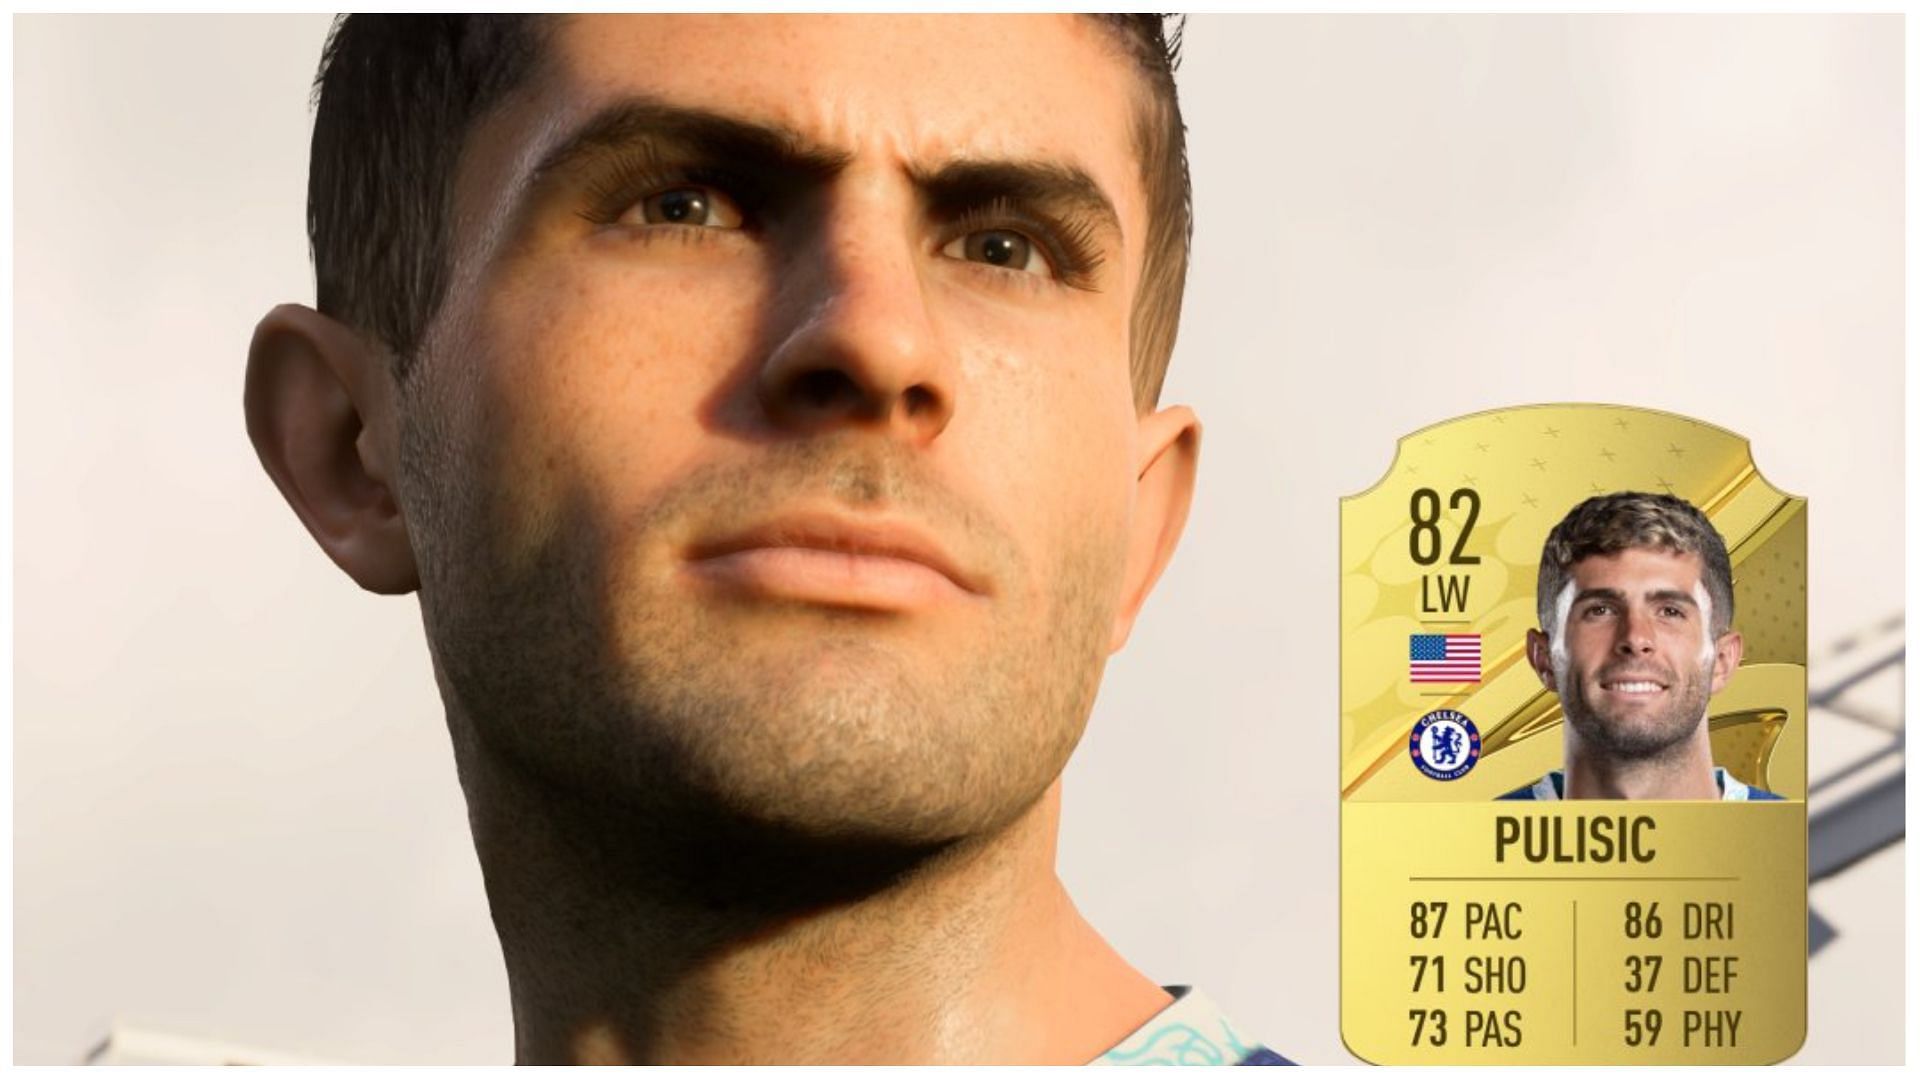 Christian Pulisic is included in the list of FIFA 23 ambassadors (Image via EA Sports)